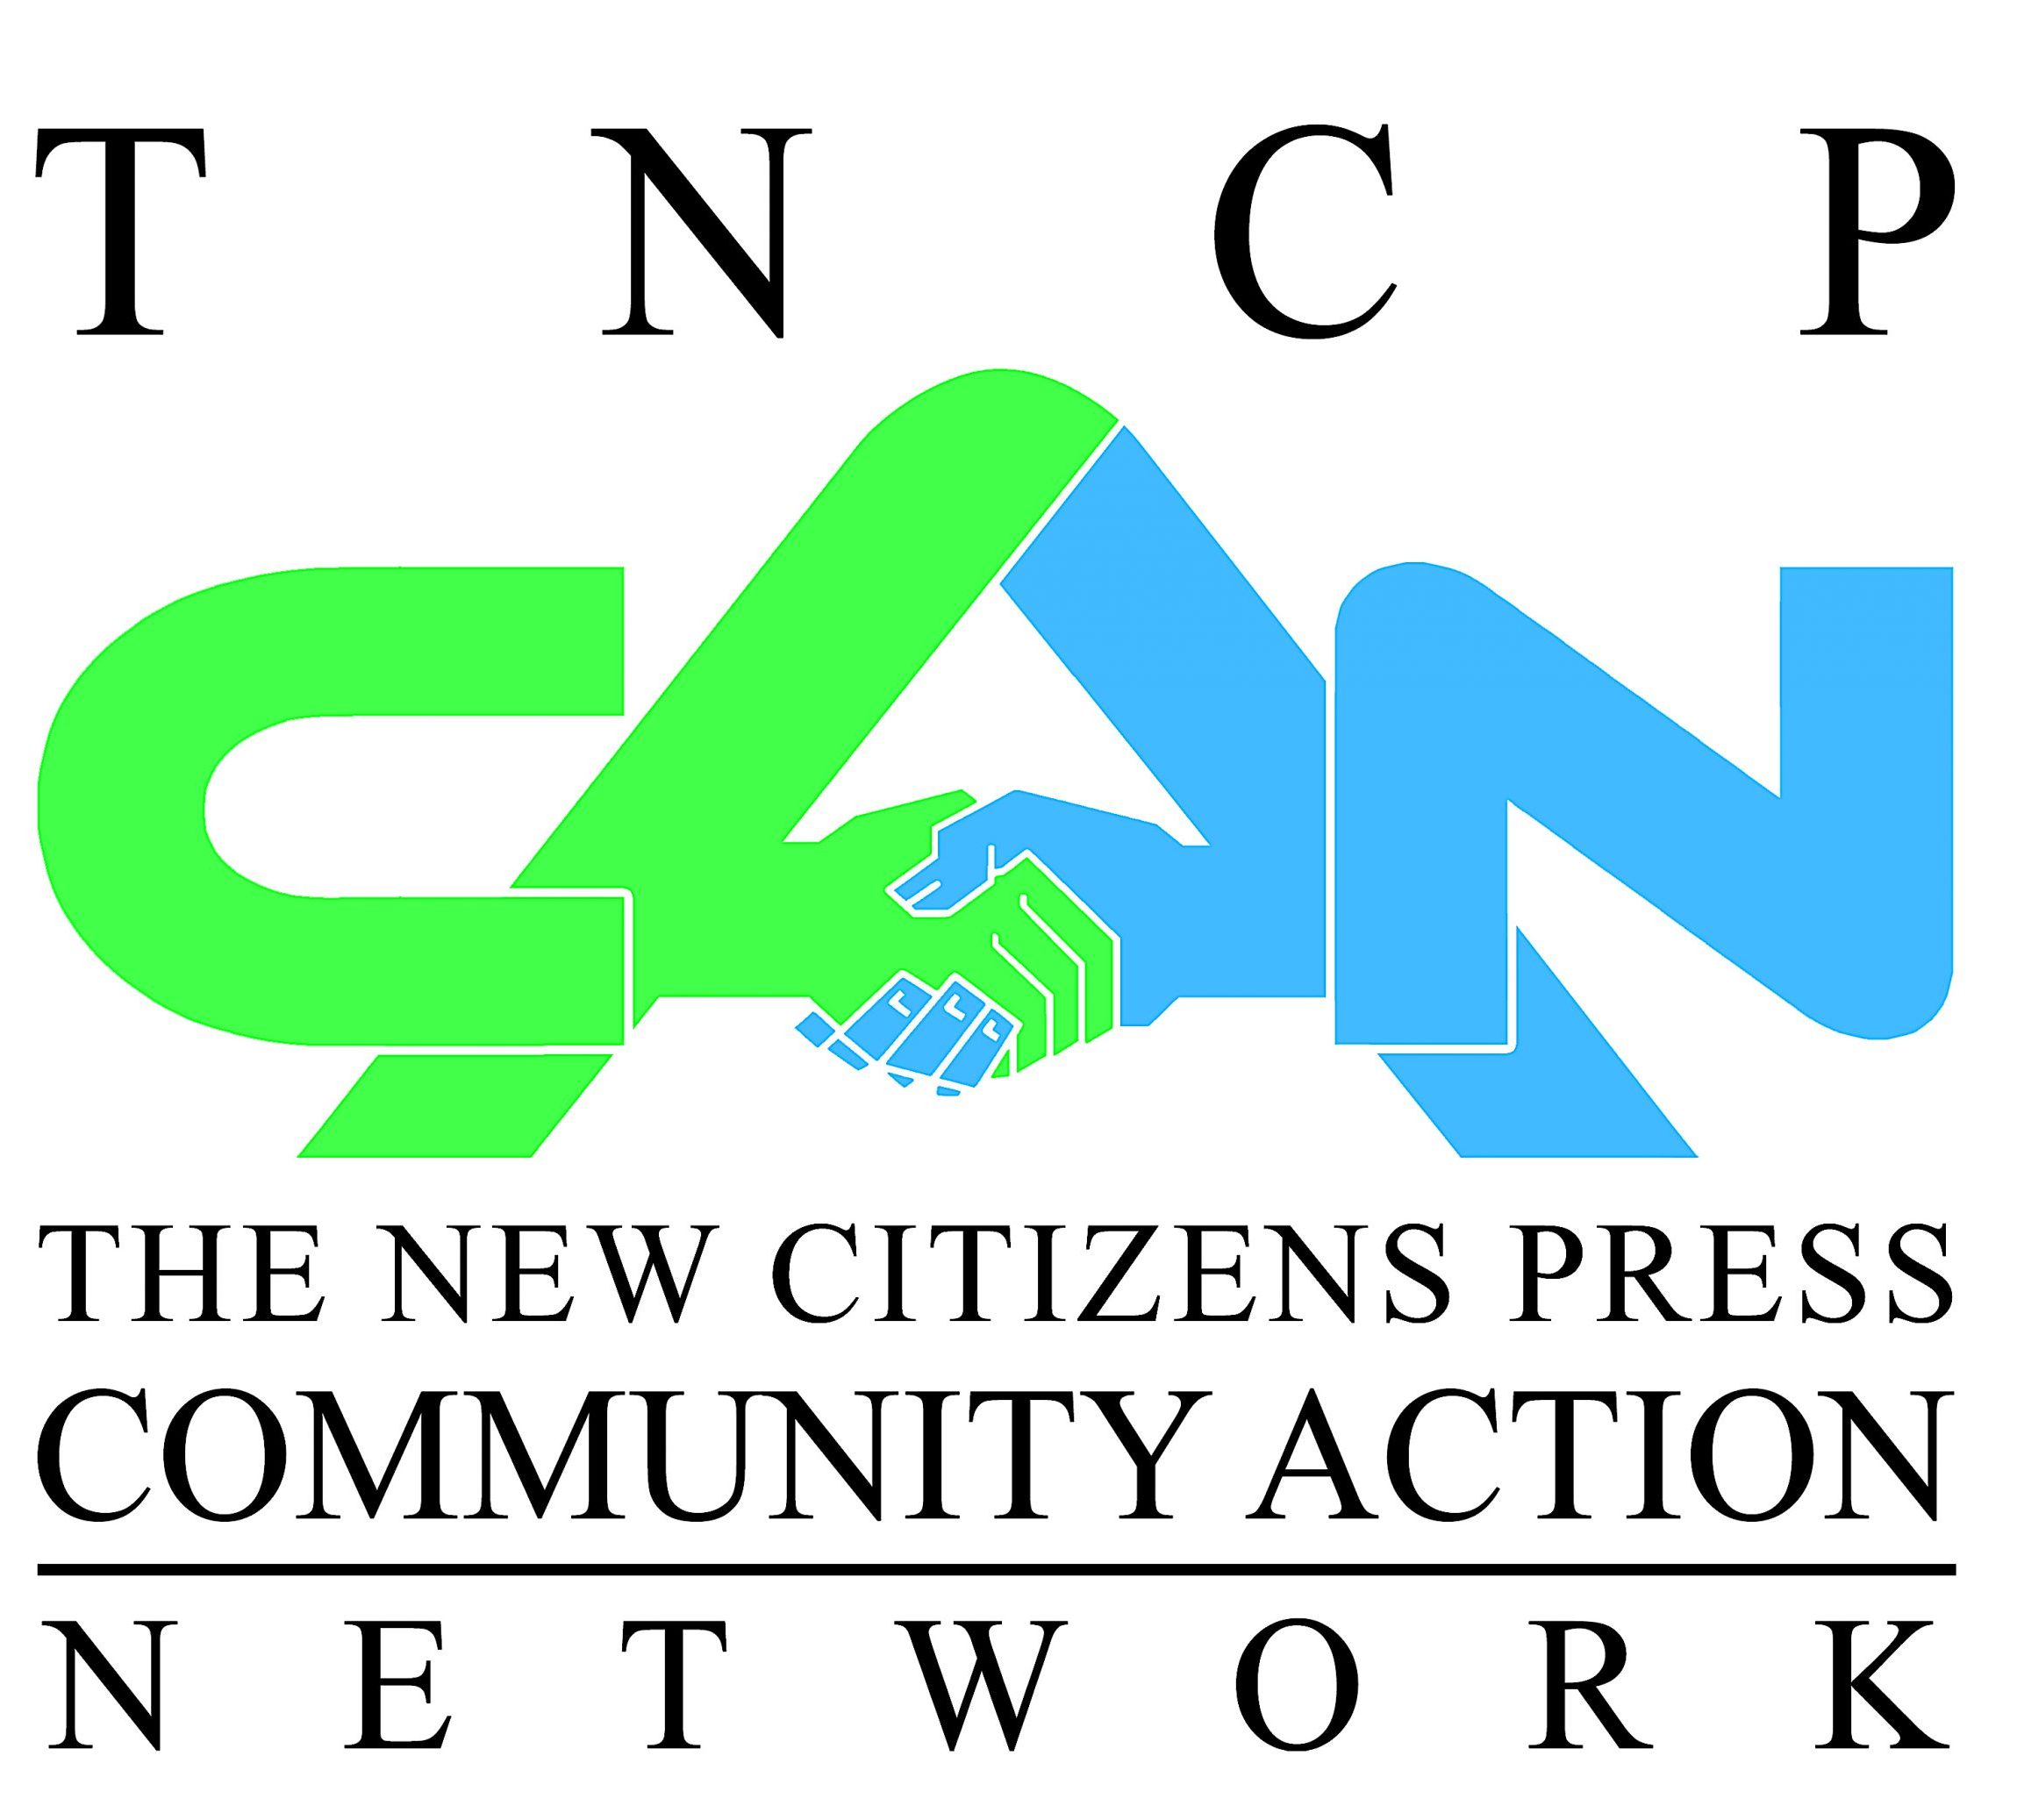 The New Citizens Press Community Action Network